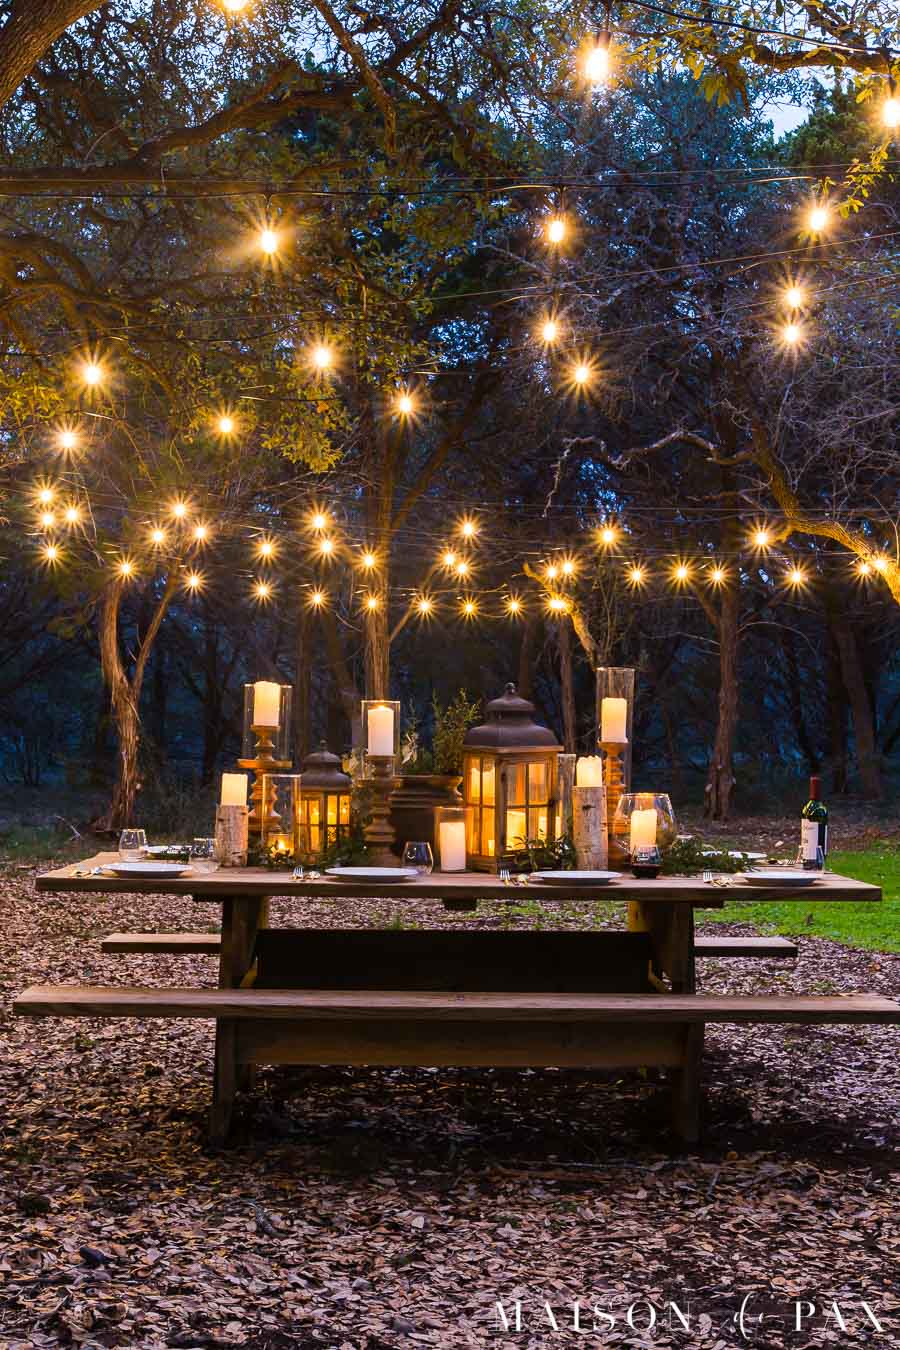 picnic table decorated with candles and string lights | Maison de Pax